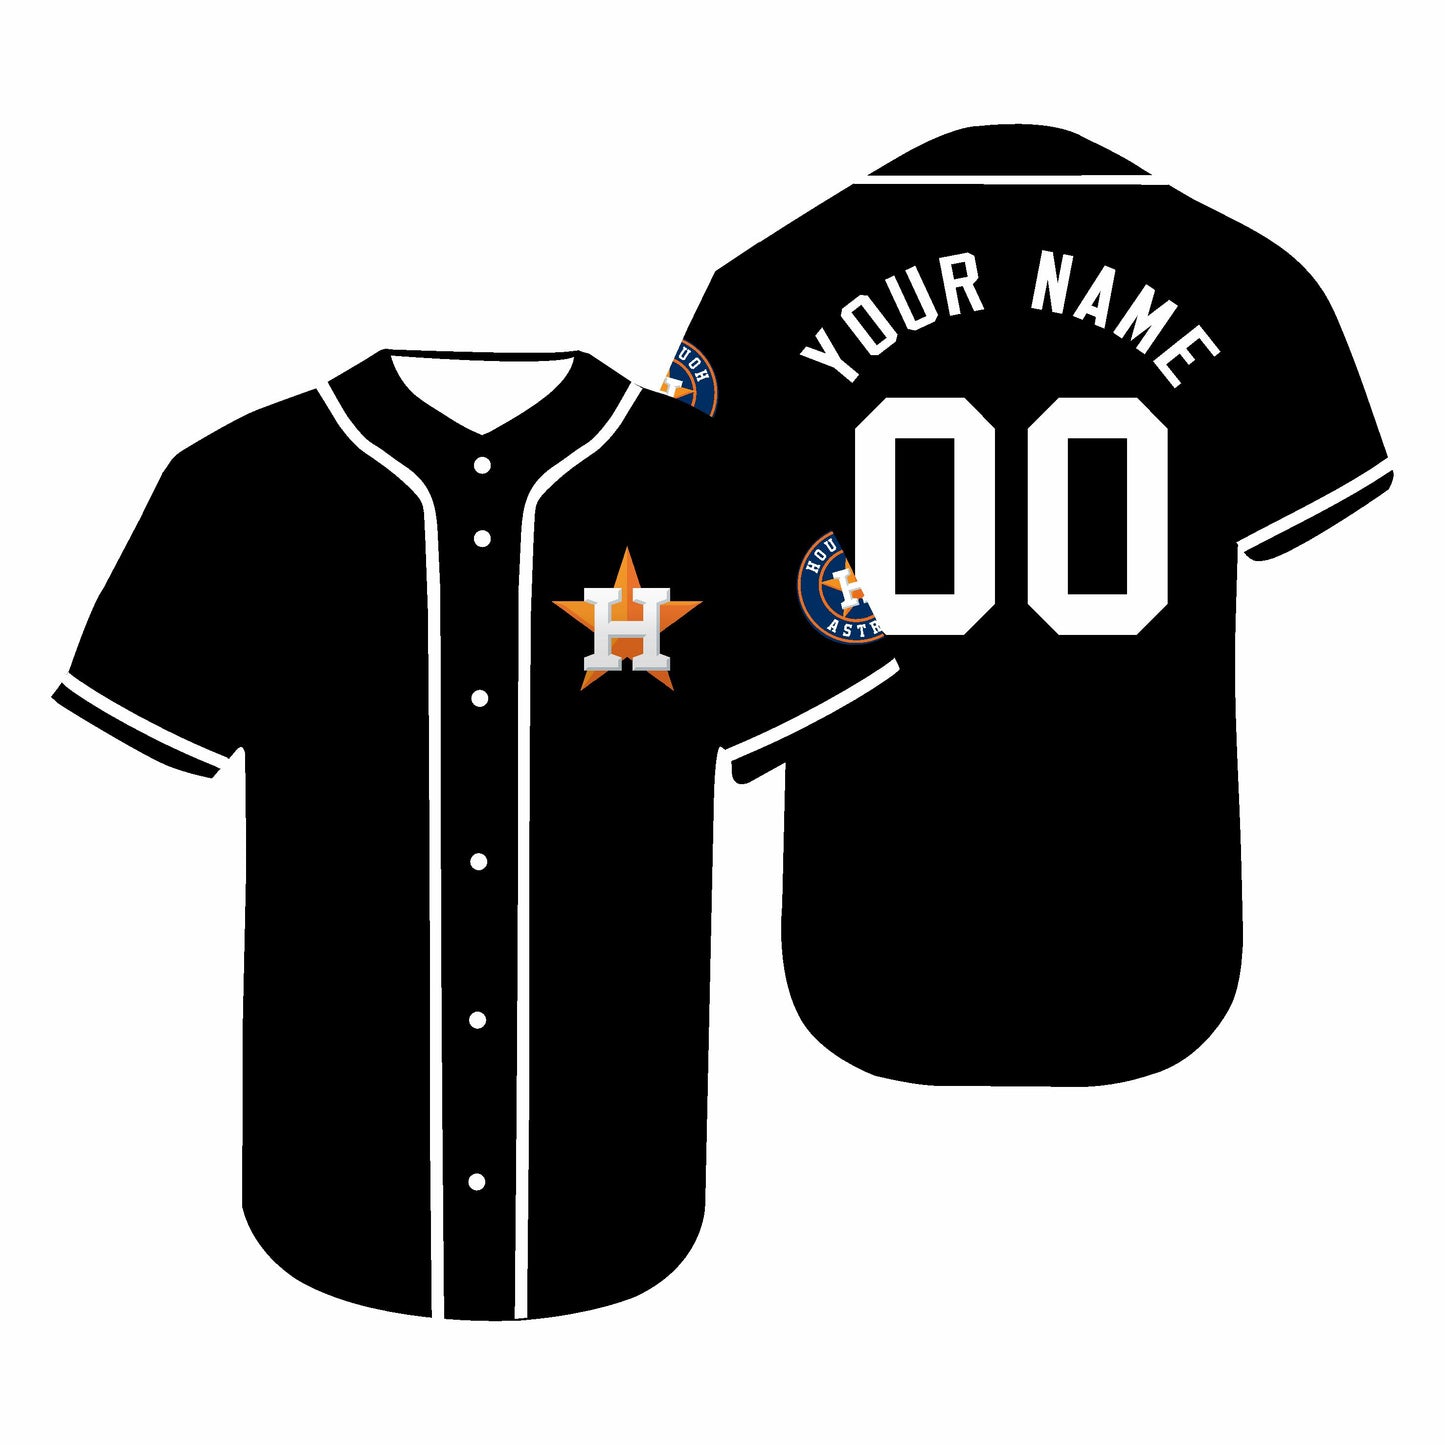 Custom Jerseys Baseball Houston Astros Black Personalized Jersey Stitched Letter And Numbers For Men Women Youth Birthday Gift